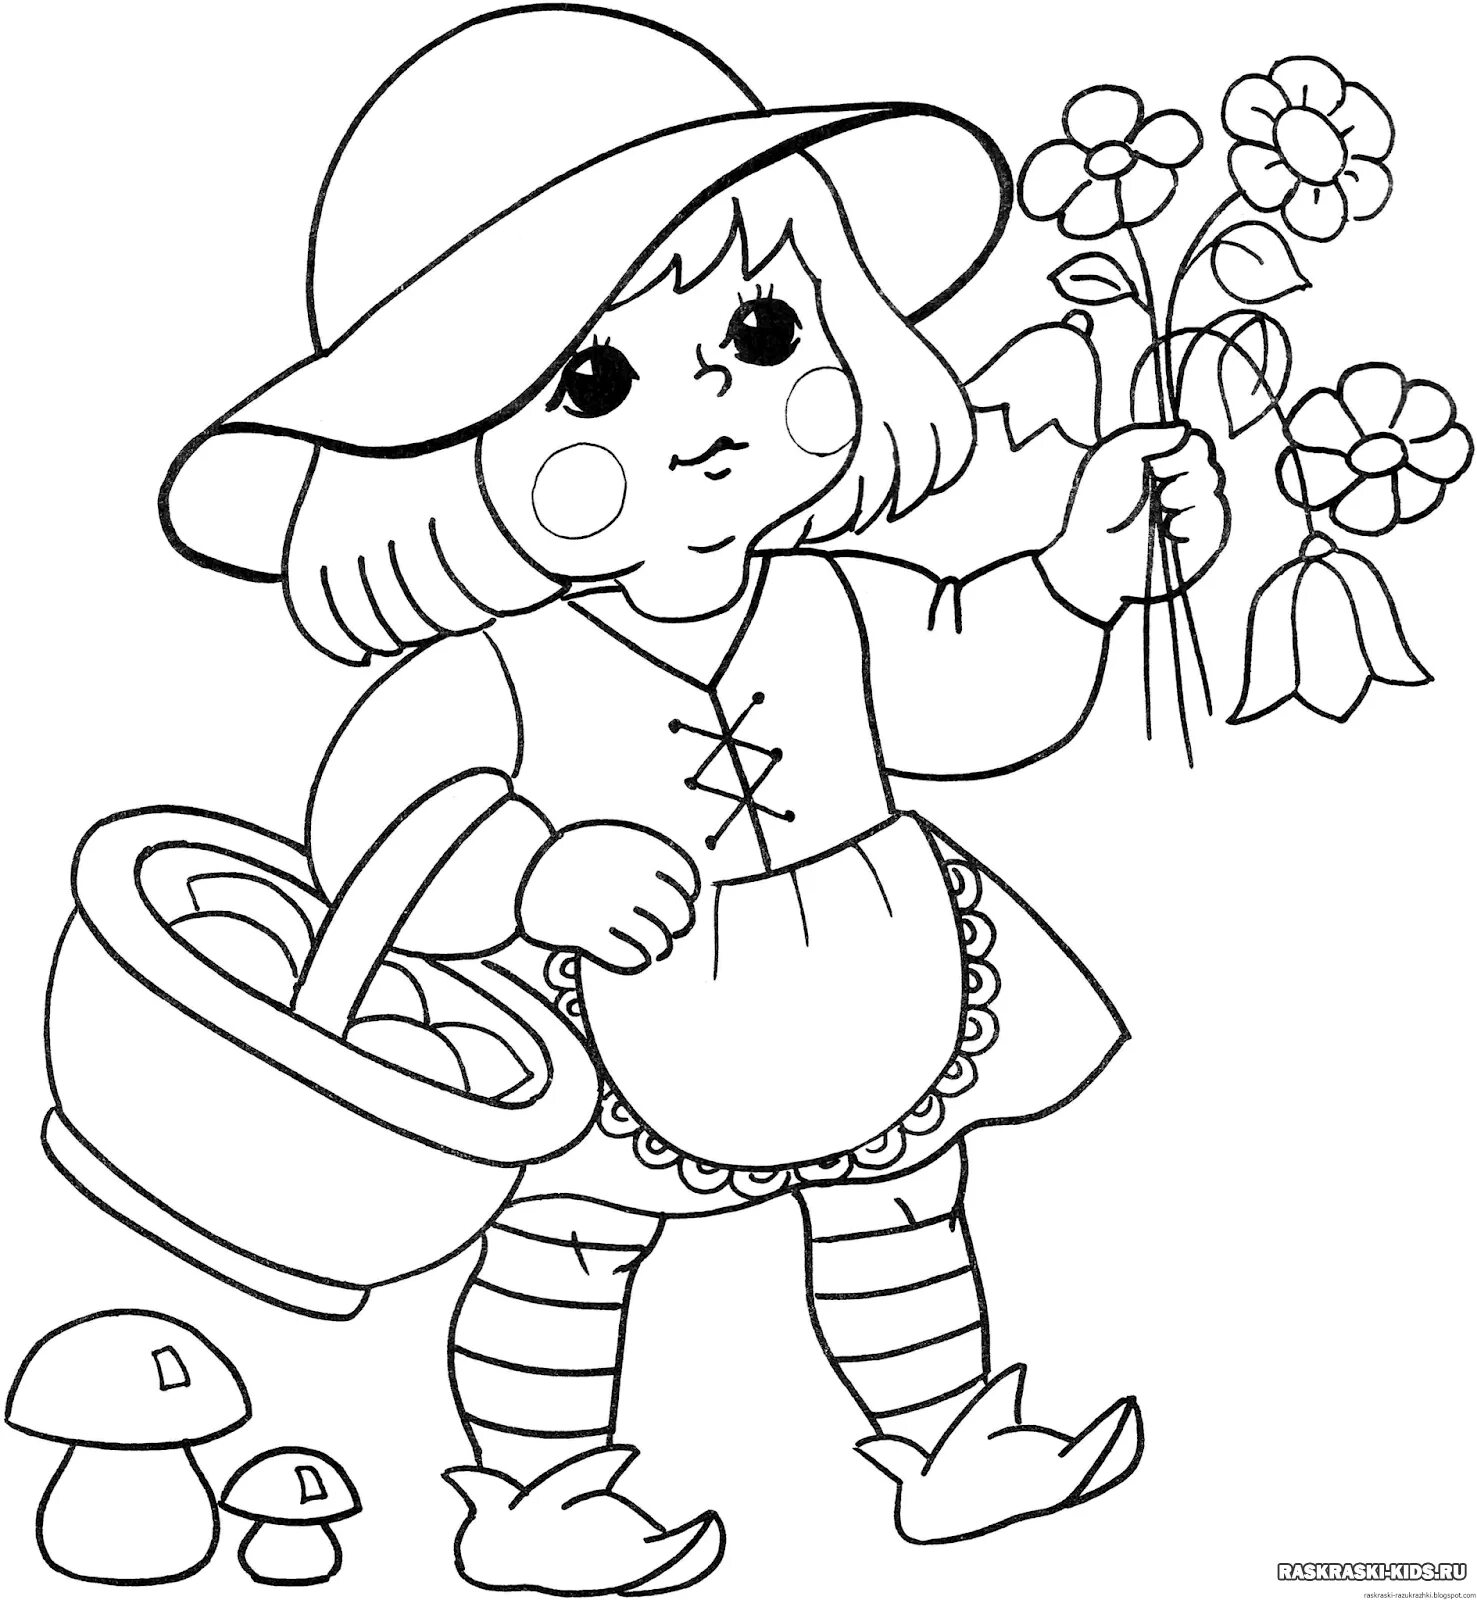 Hypnotic fairy tale coloring book for girls